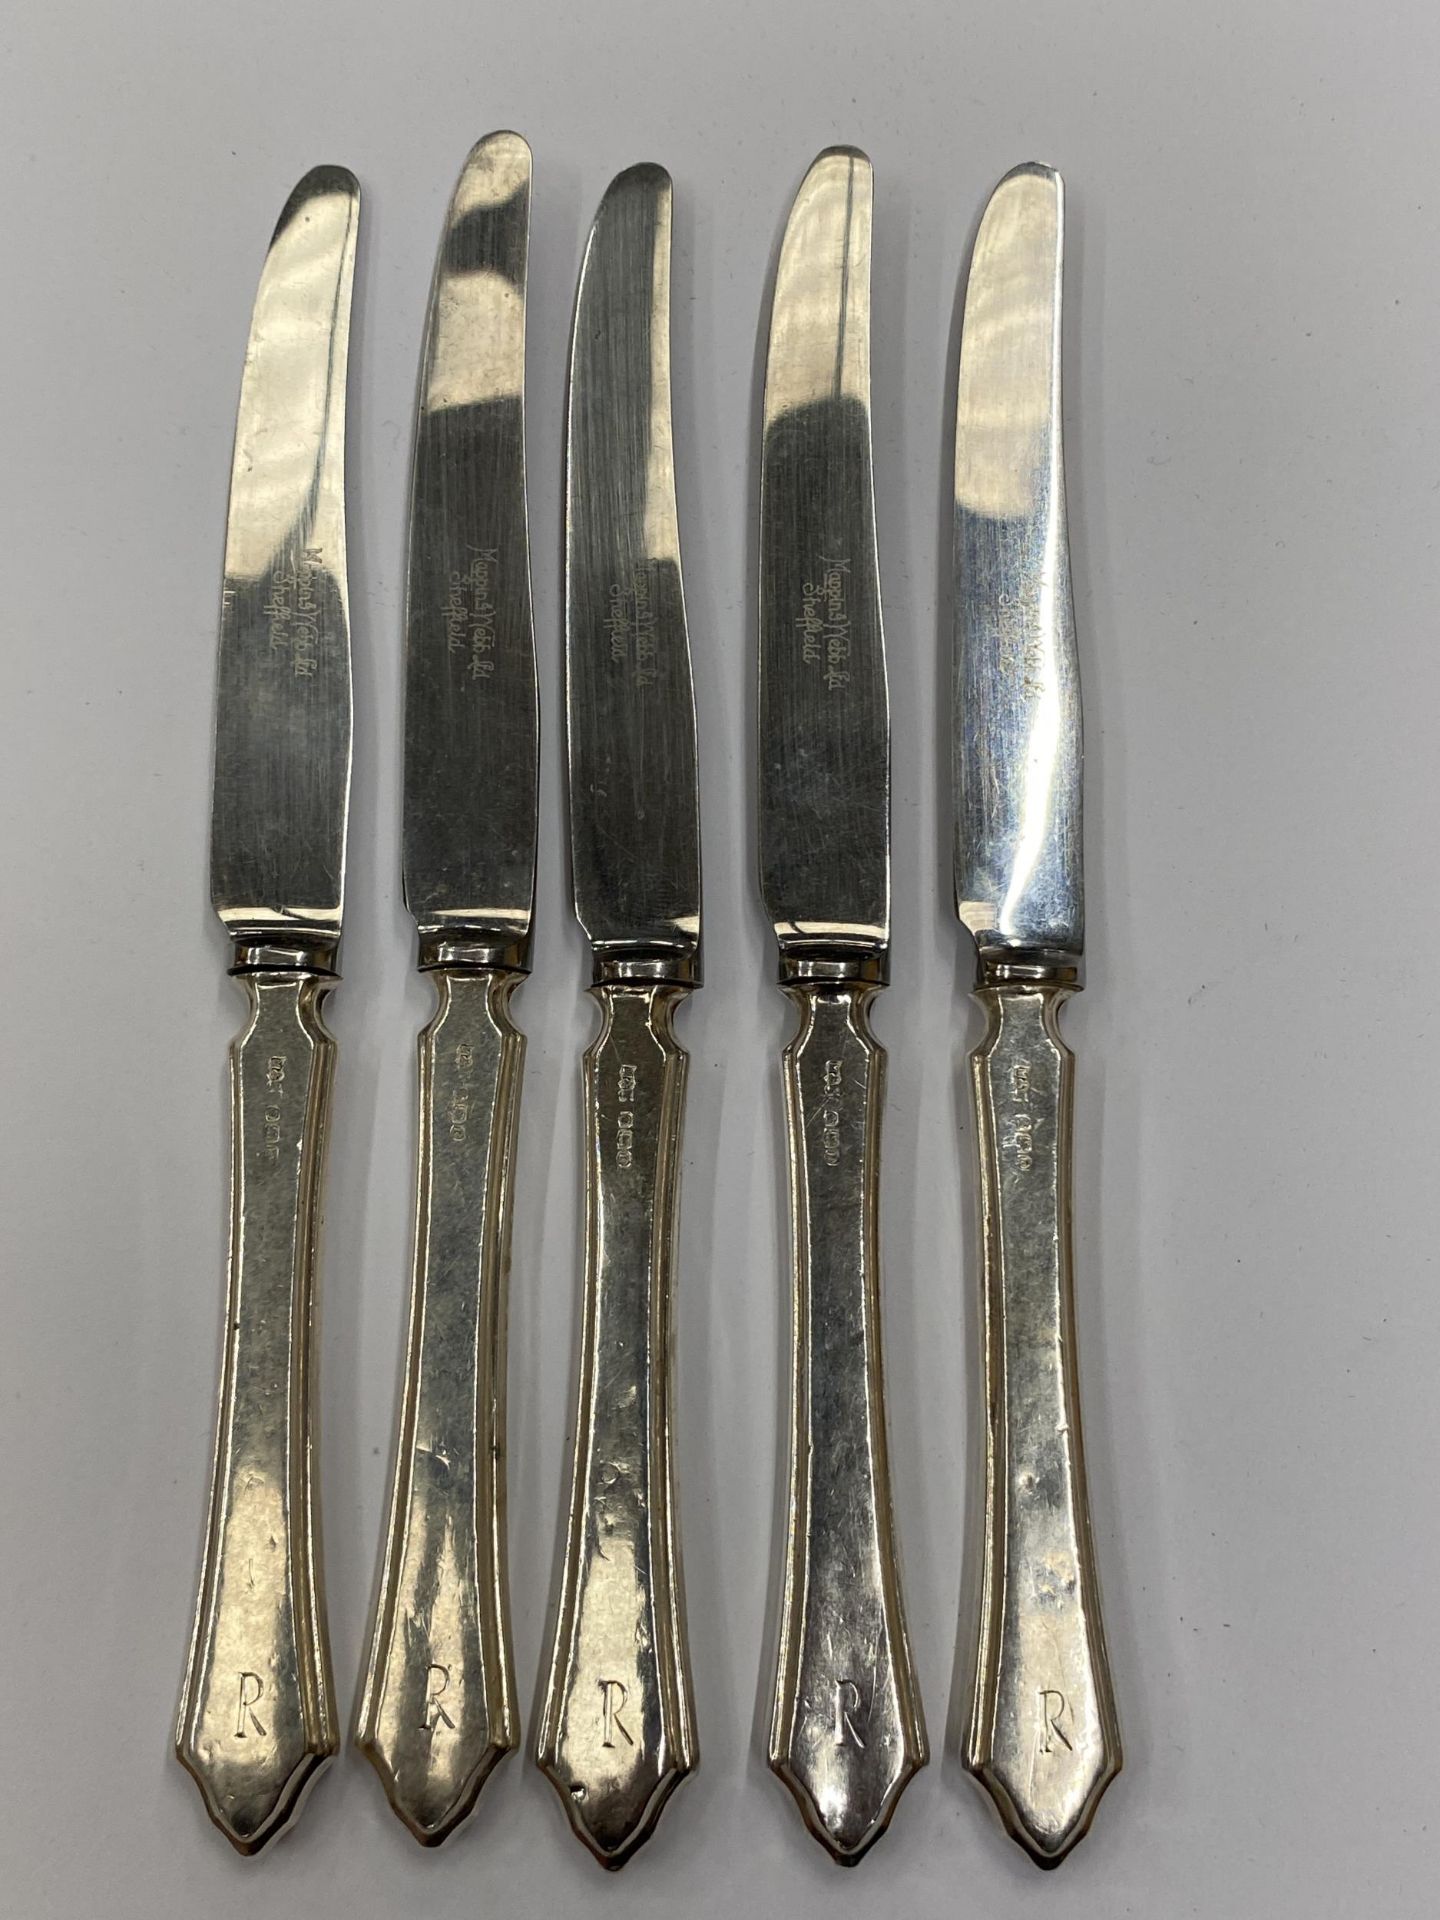 FIVE HALLMARKED SILVER HANDLED BUTTER KNIVES